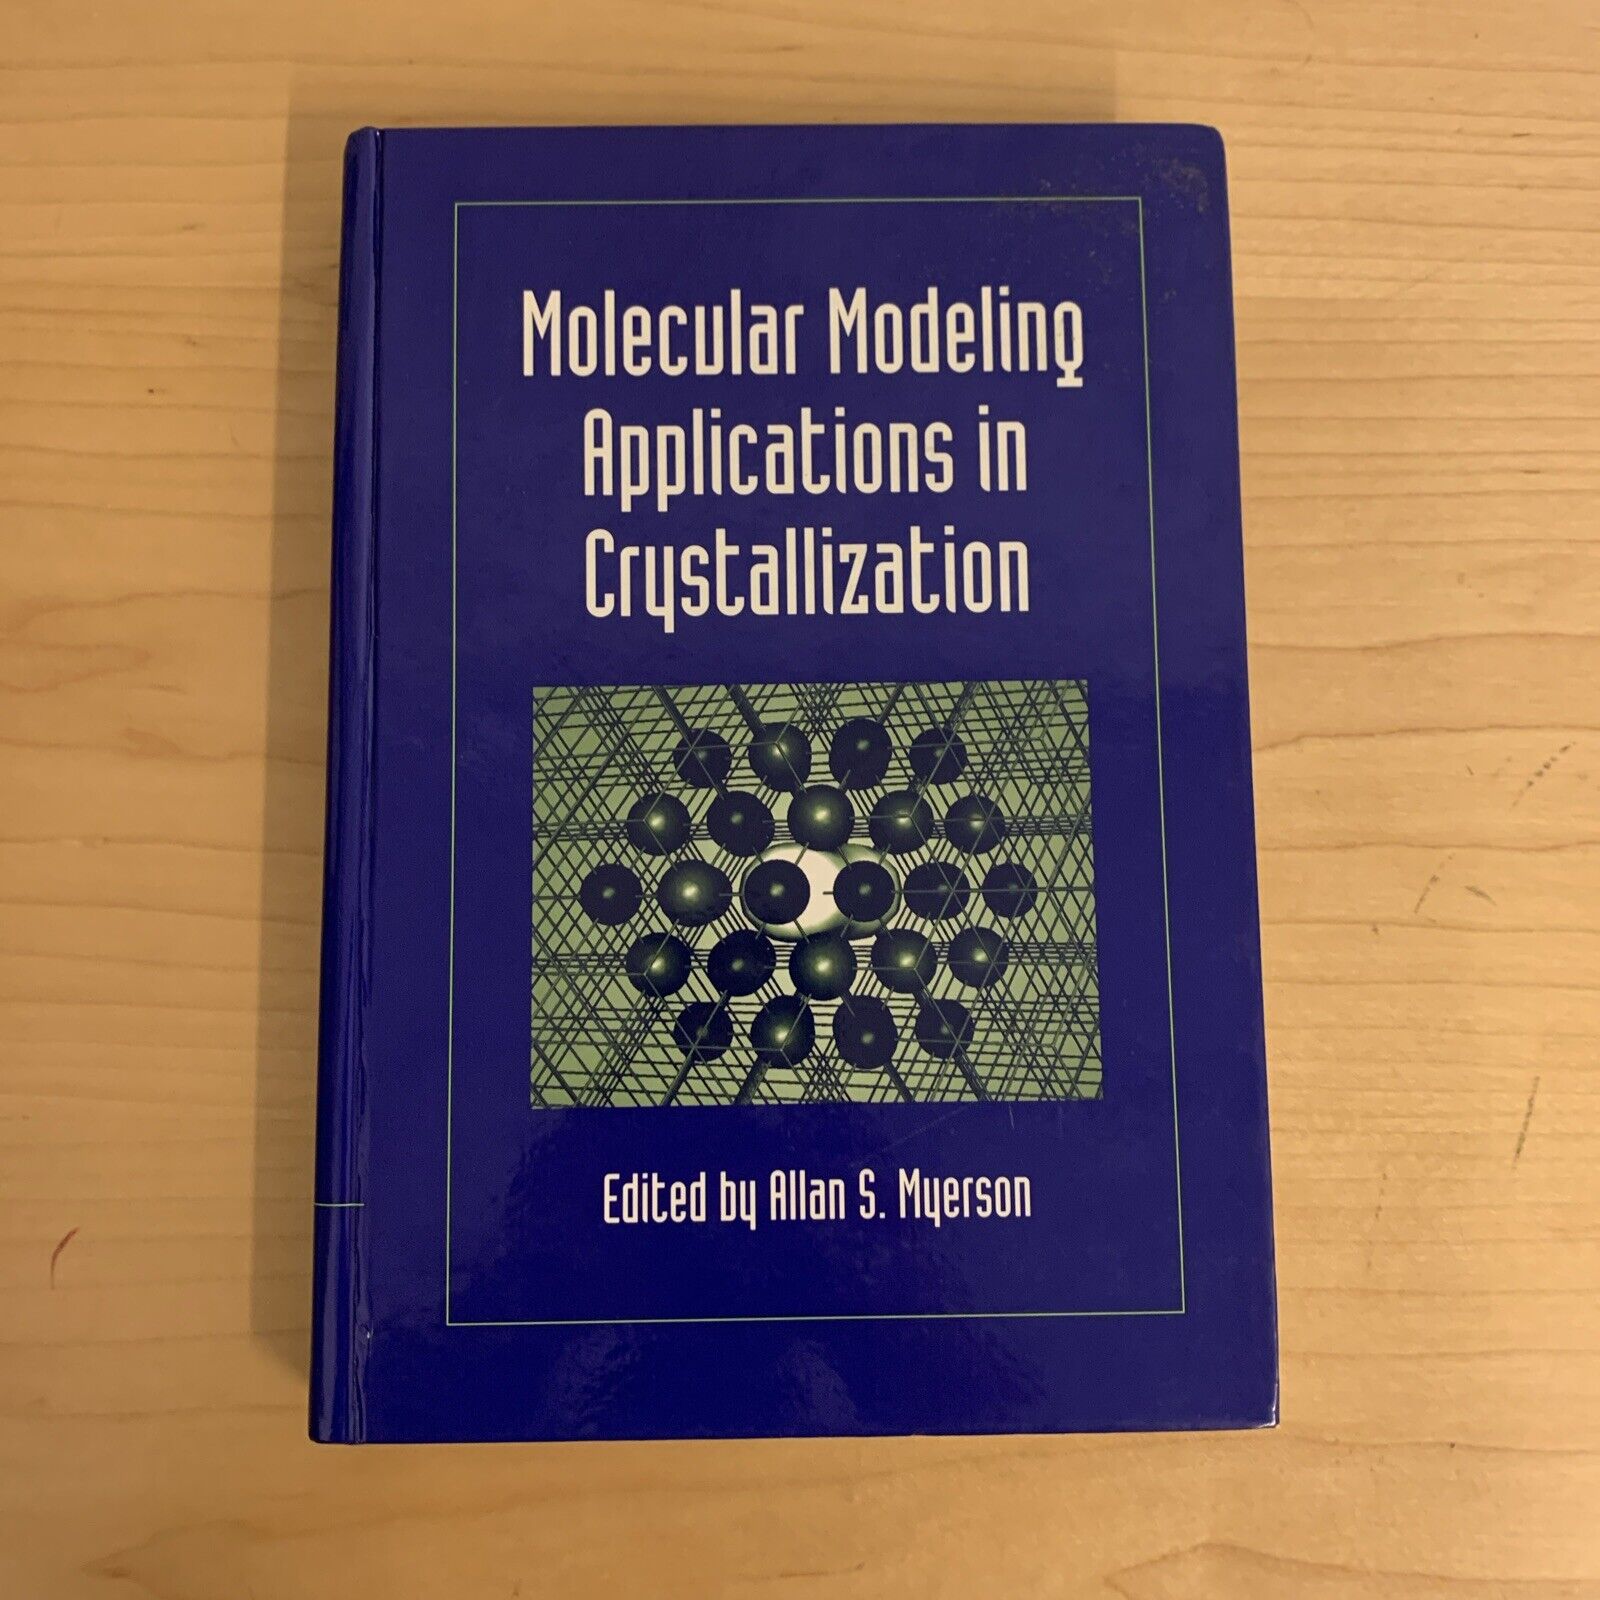 Molecular Modeling Applications in Crystallization edited by Allan S. Myerson